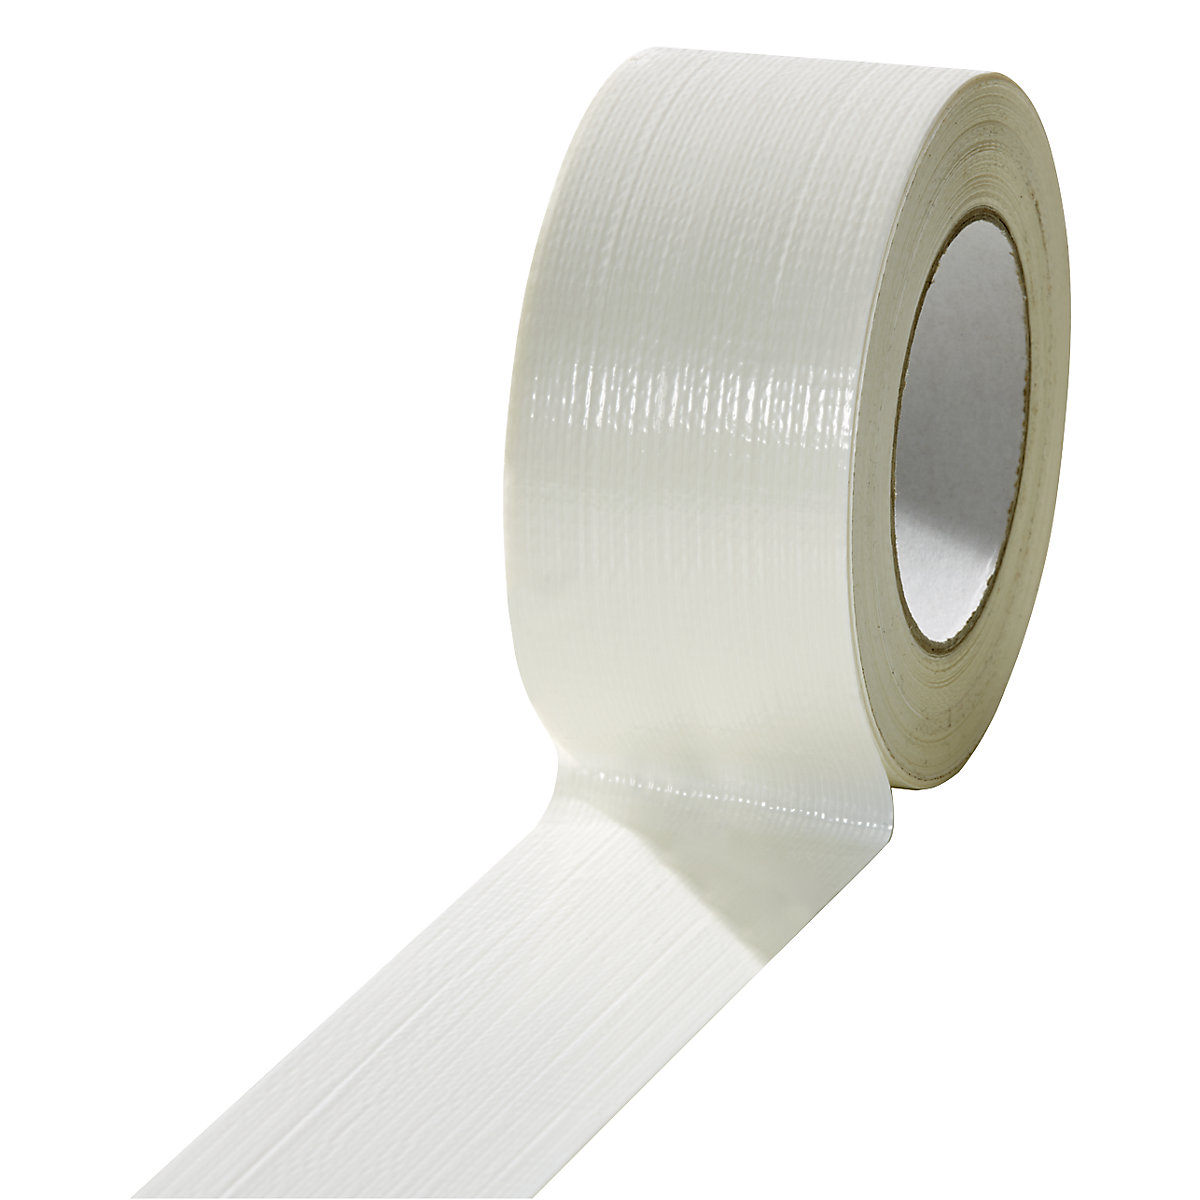 Fabric tape, in different colours, pack of 18 rolls, white, tape width 50 mm-10